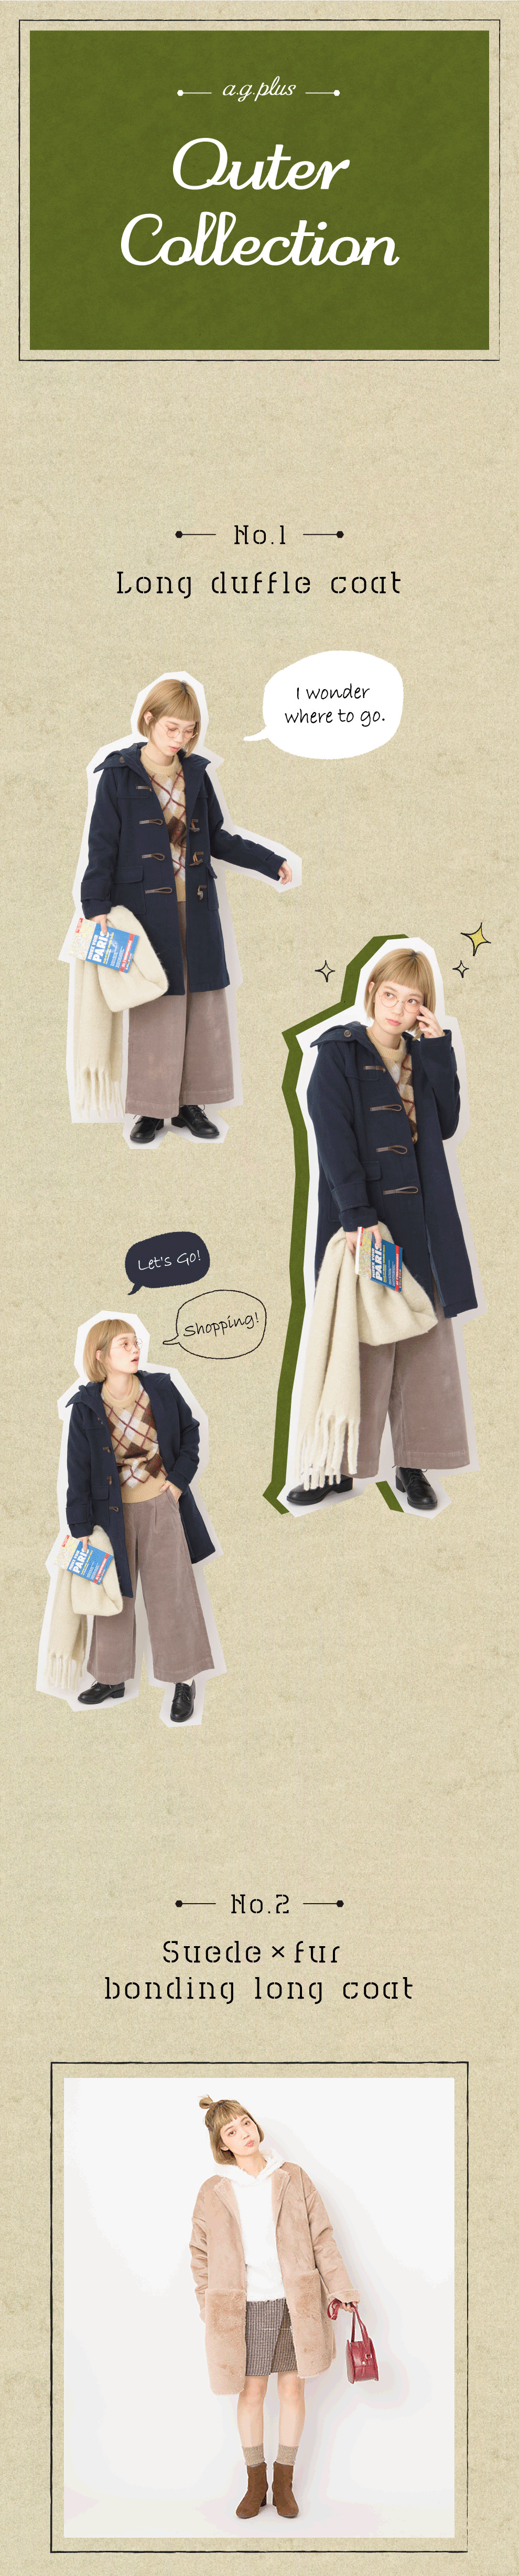 a.g.plus 2018 Outer Collection